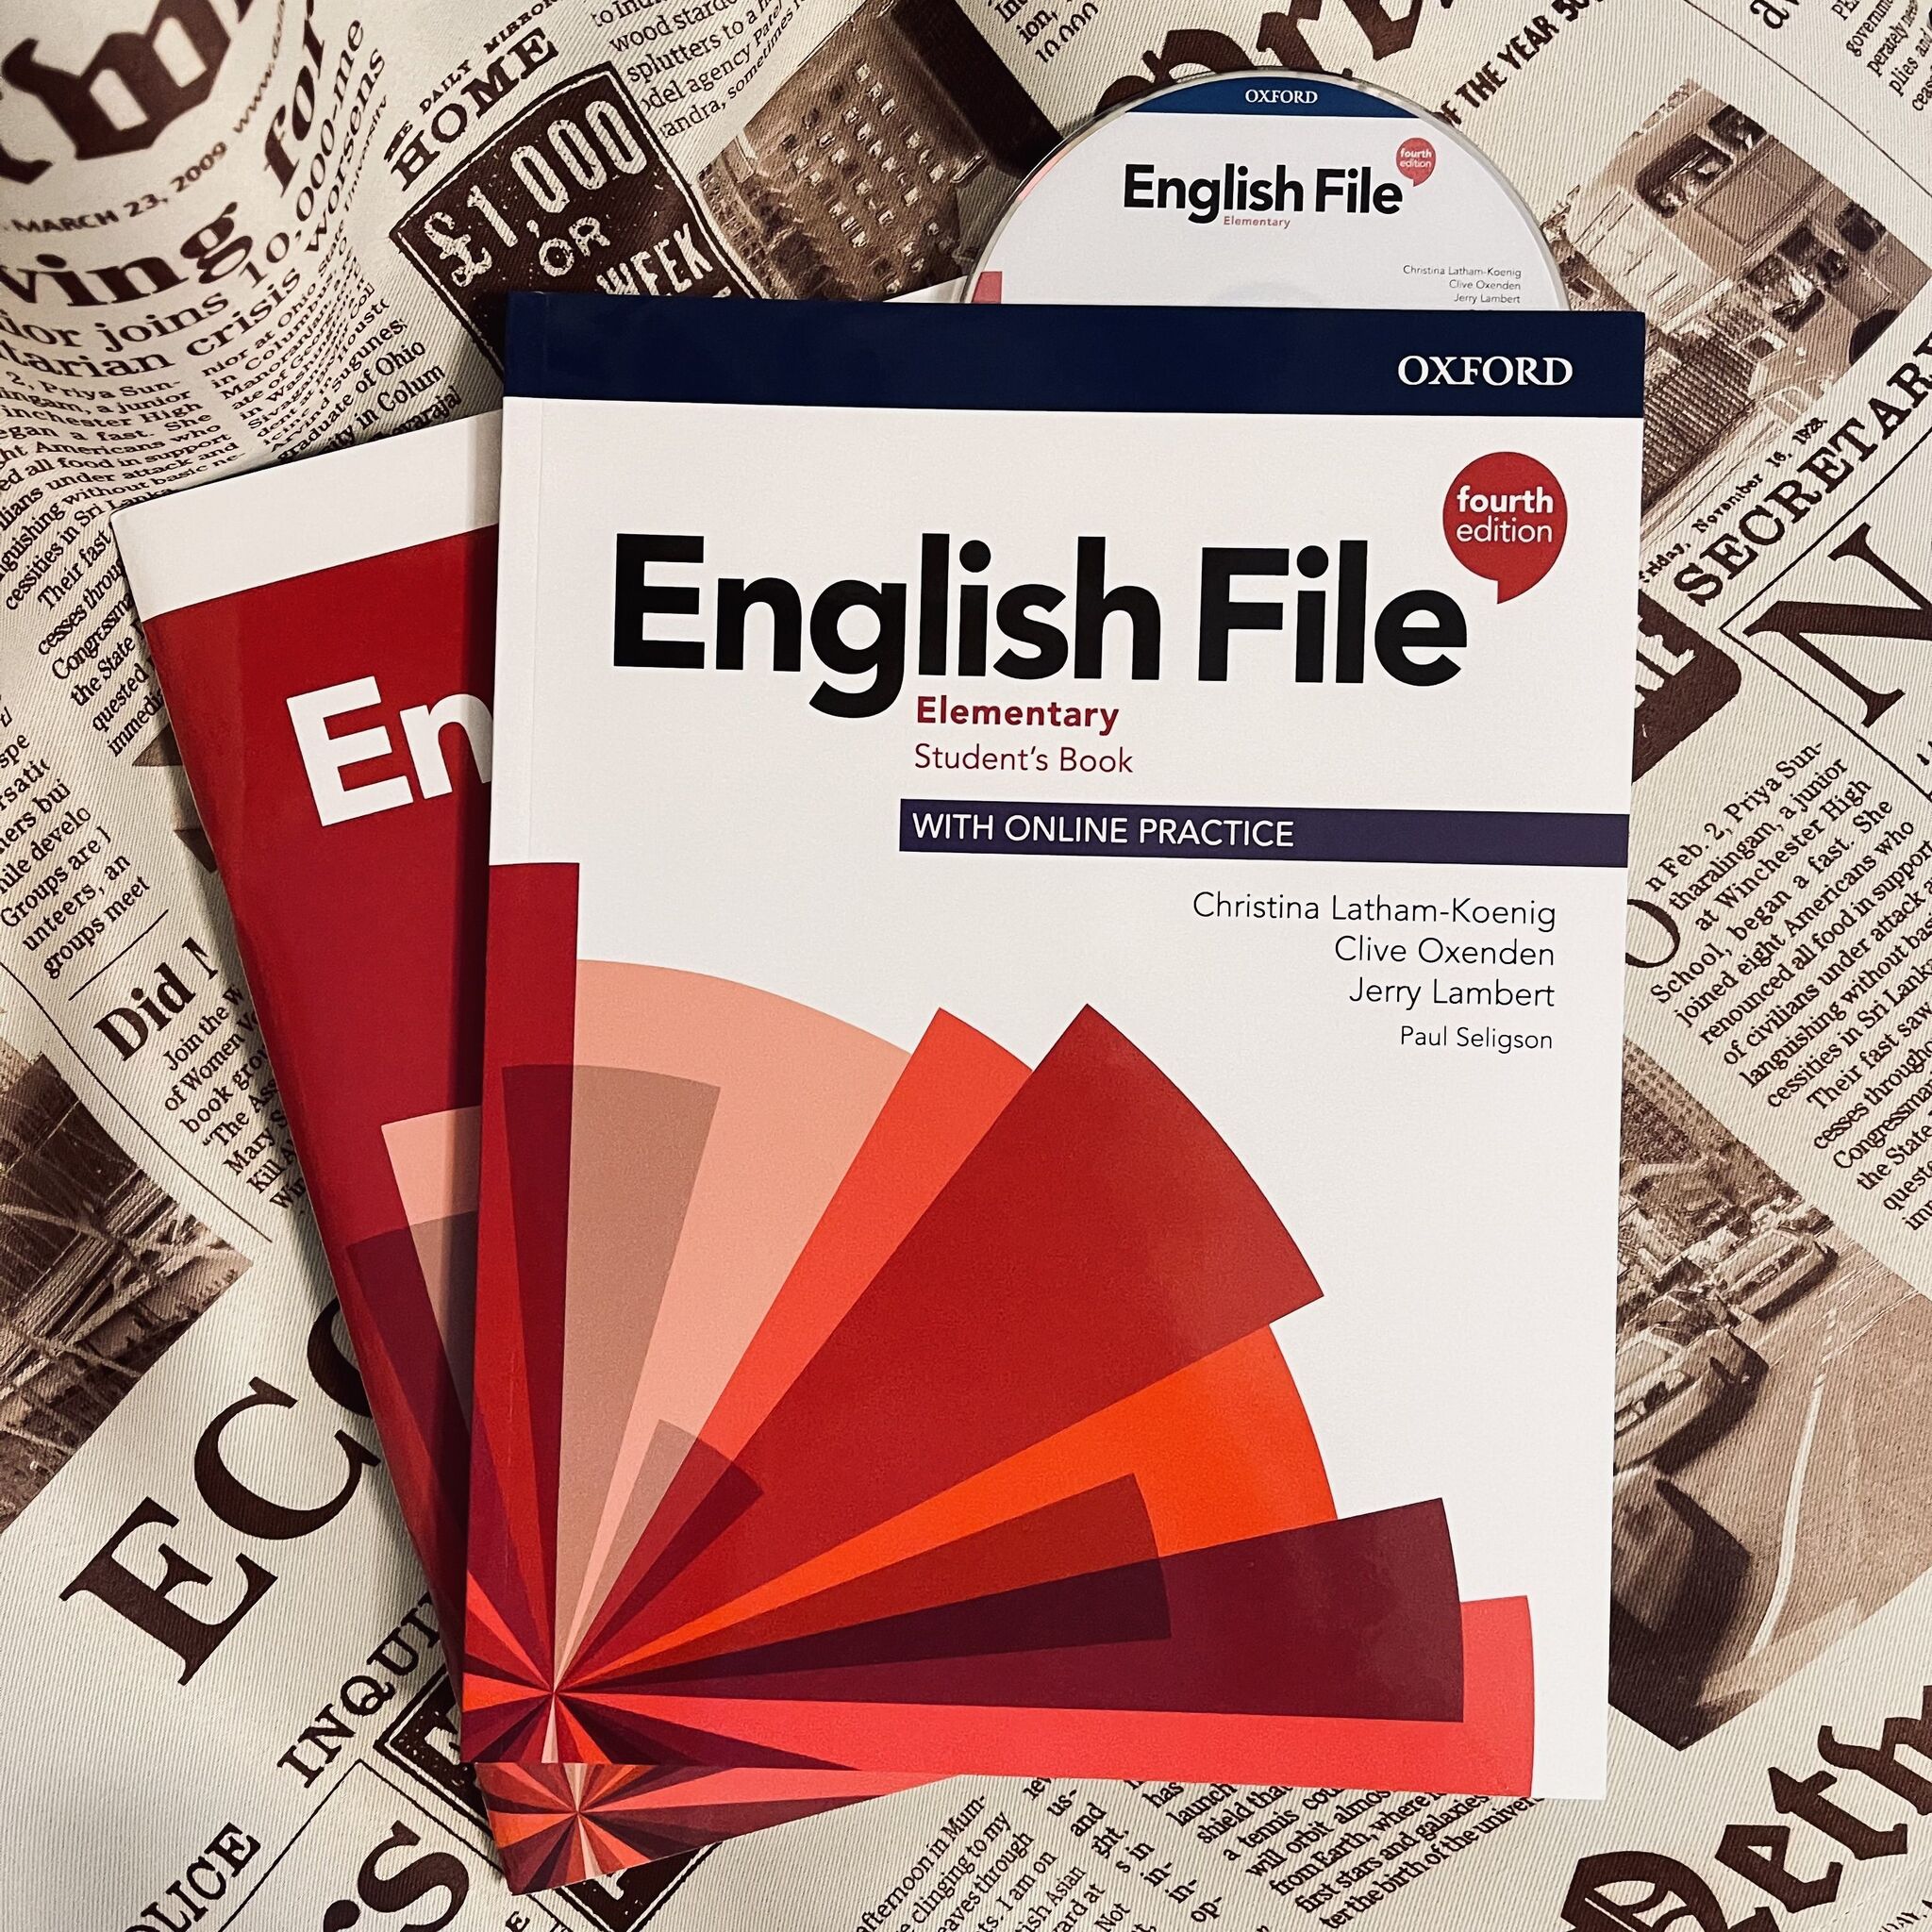 New English file Elementary student's book. English file Elementary 4th Edition. English file Elementary fourth Edition. English file Elementary второе издание. New english file elementary 4th